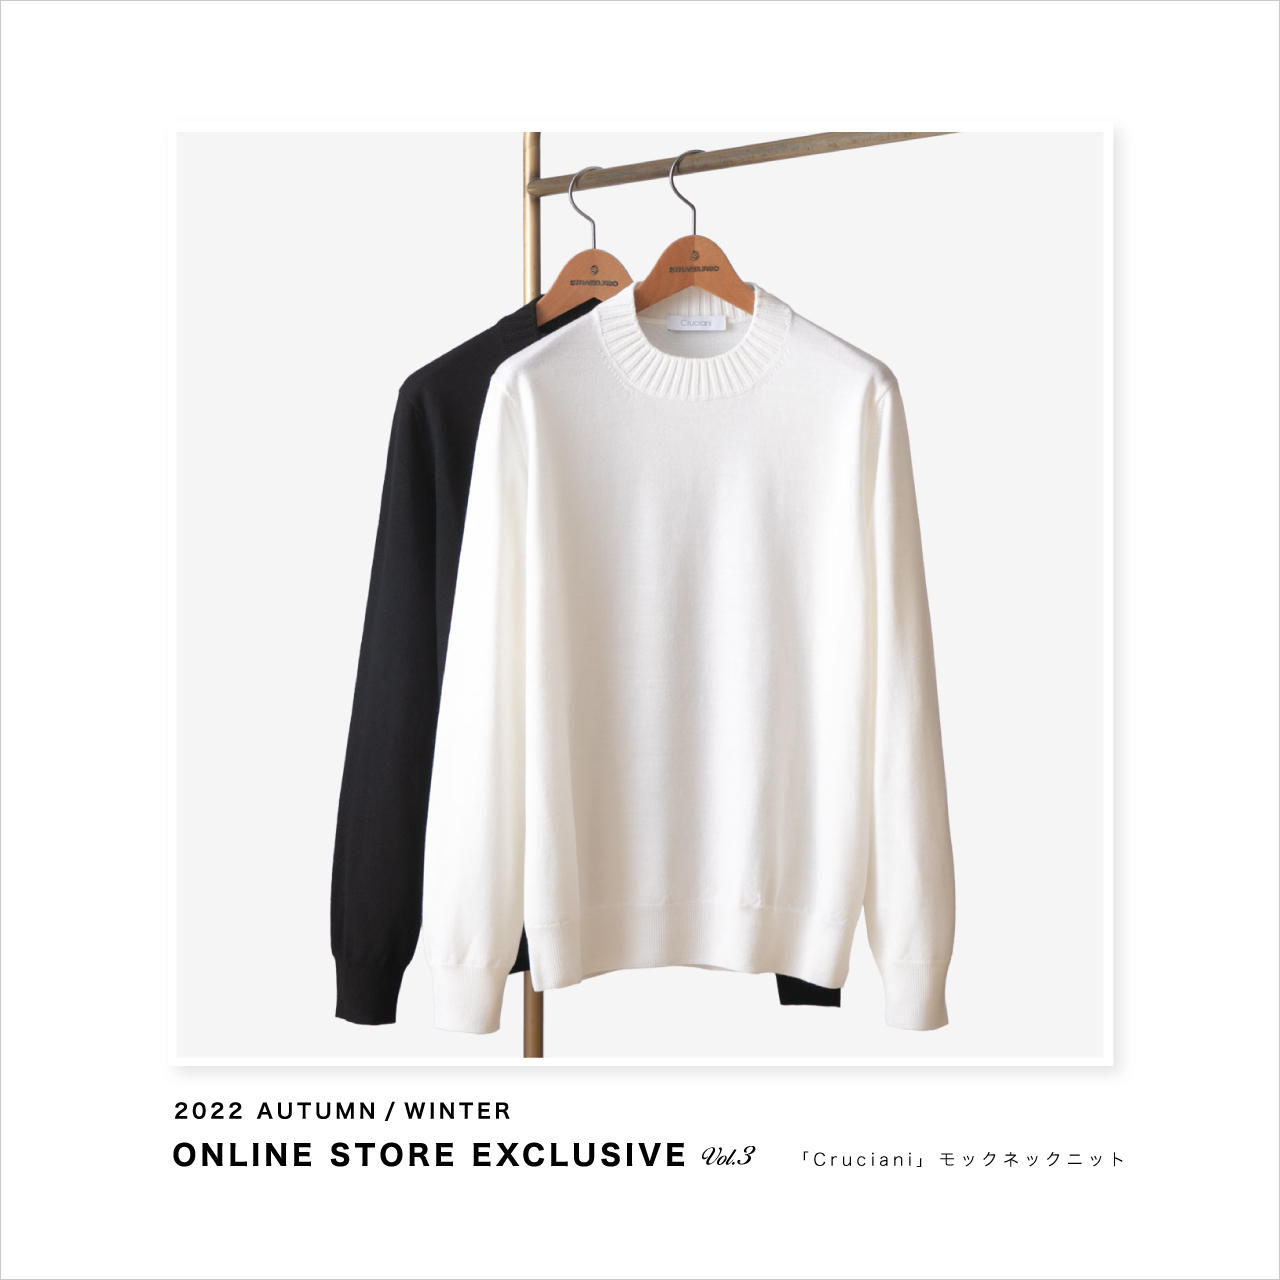  ONLINE STORE EXCLUSIVE CRUCIANI モックネックニット